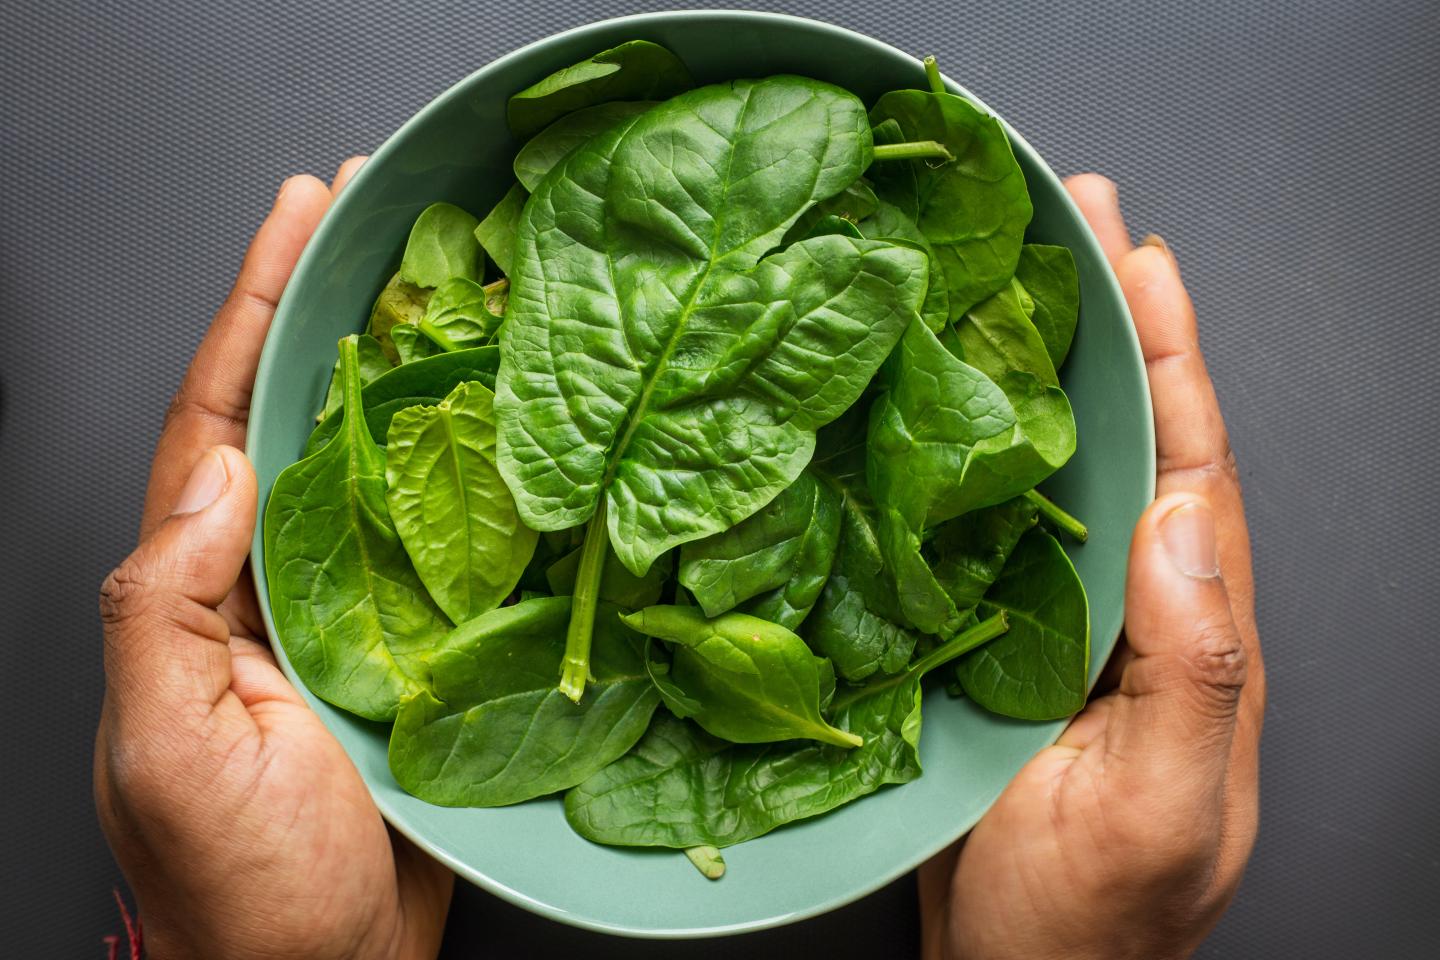 Leafy green vegetables are essential for muscle strength